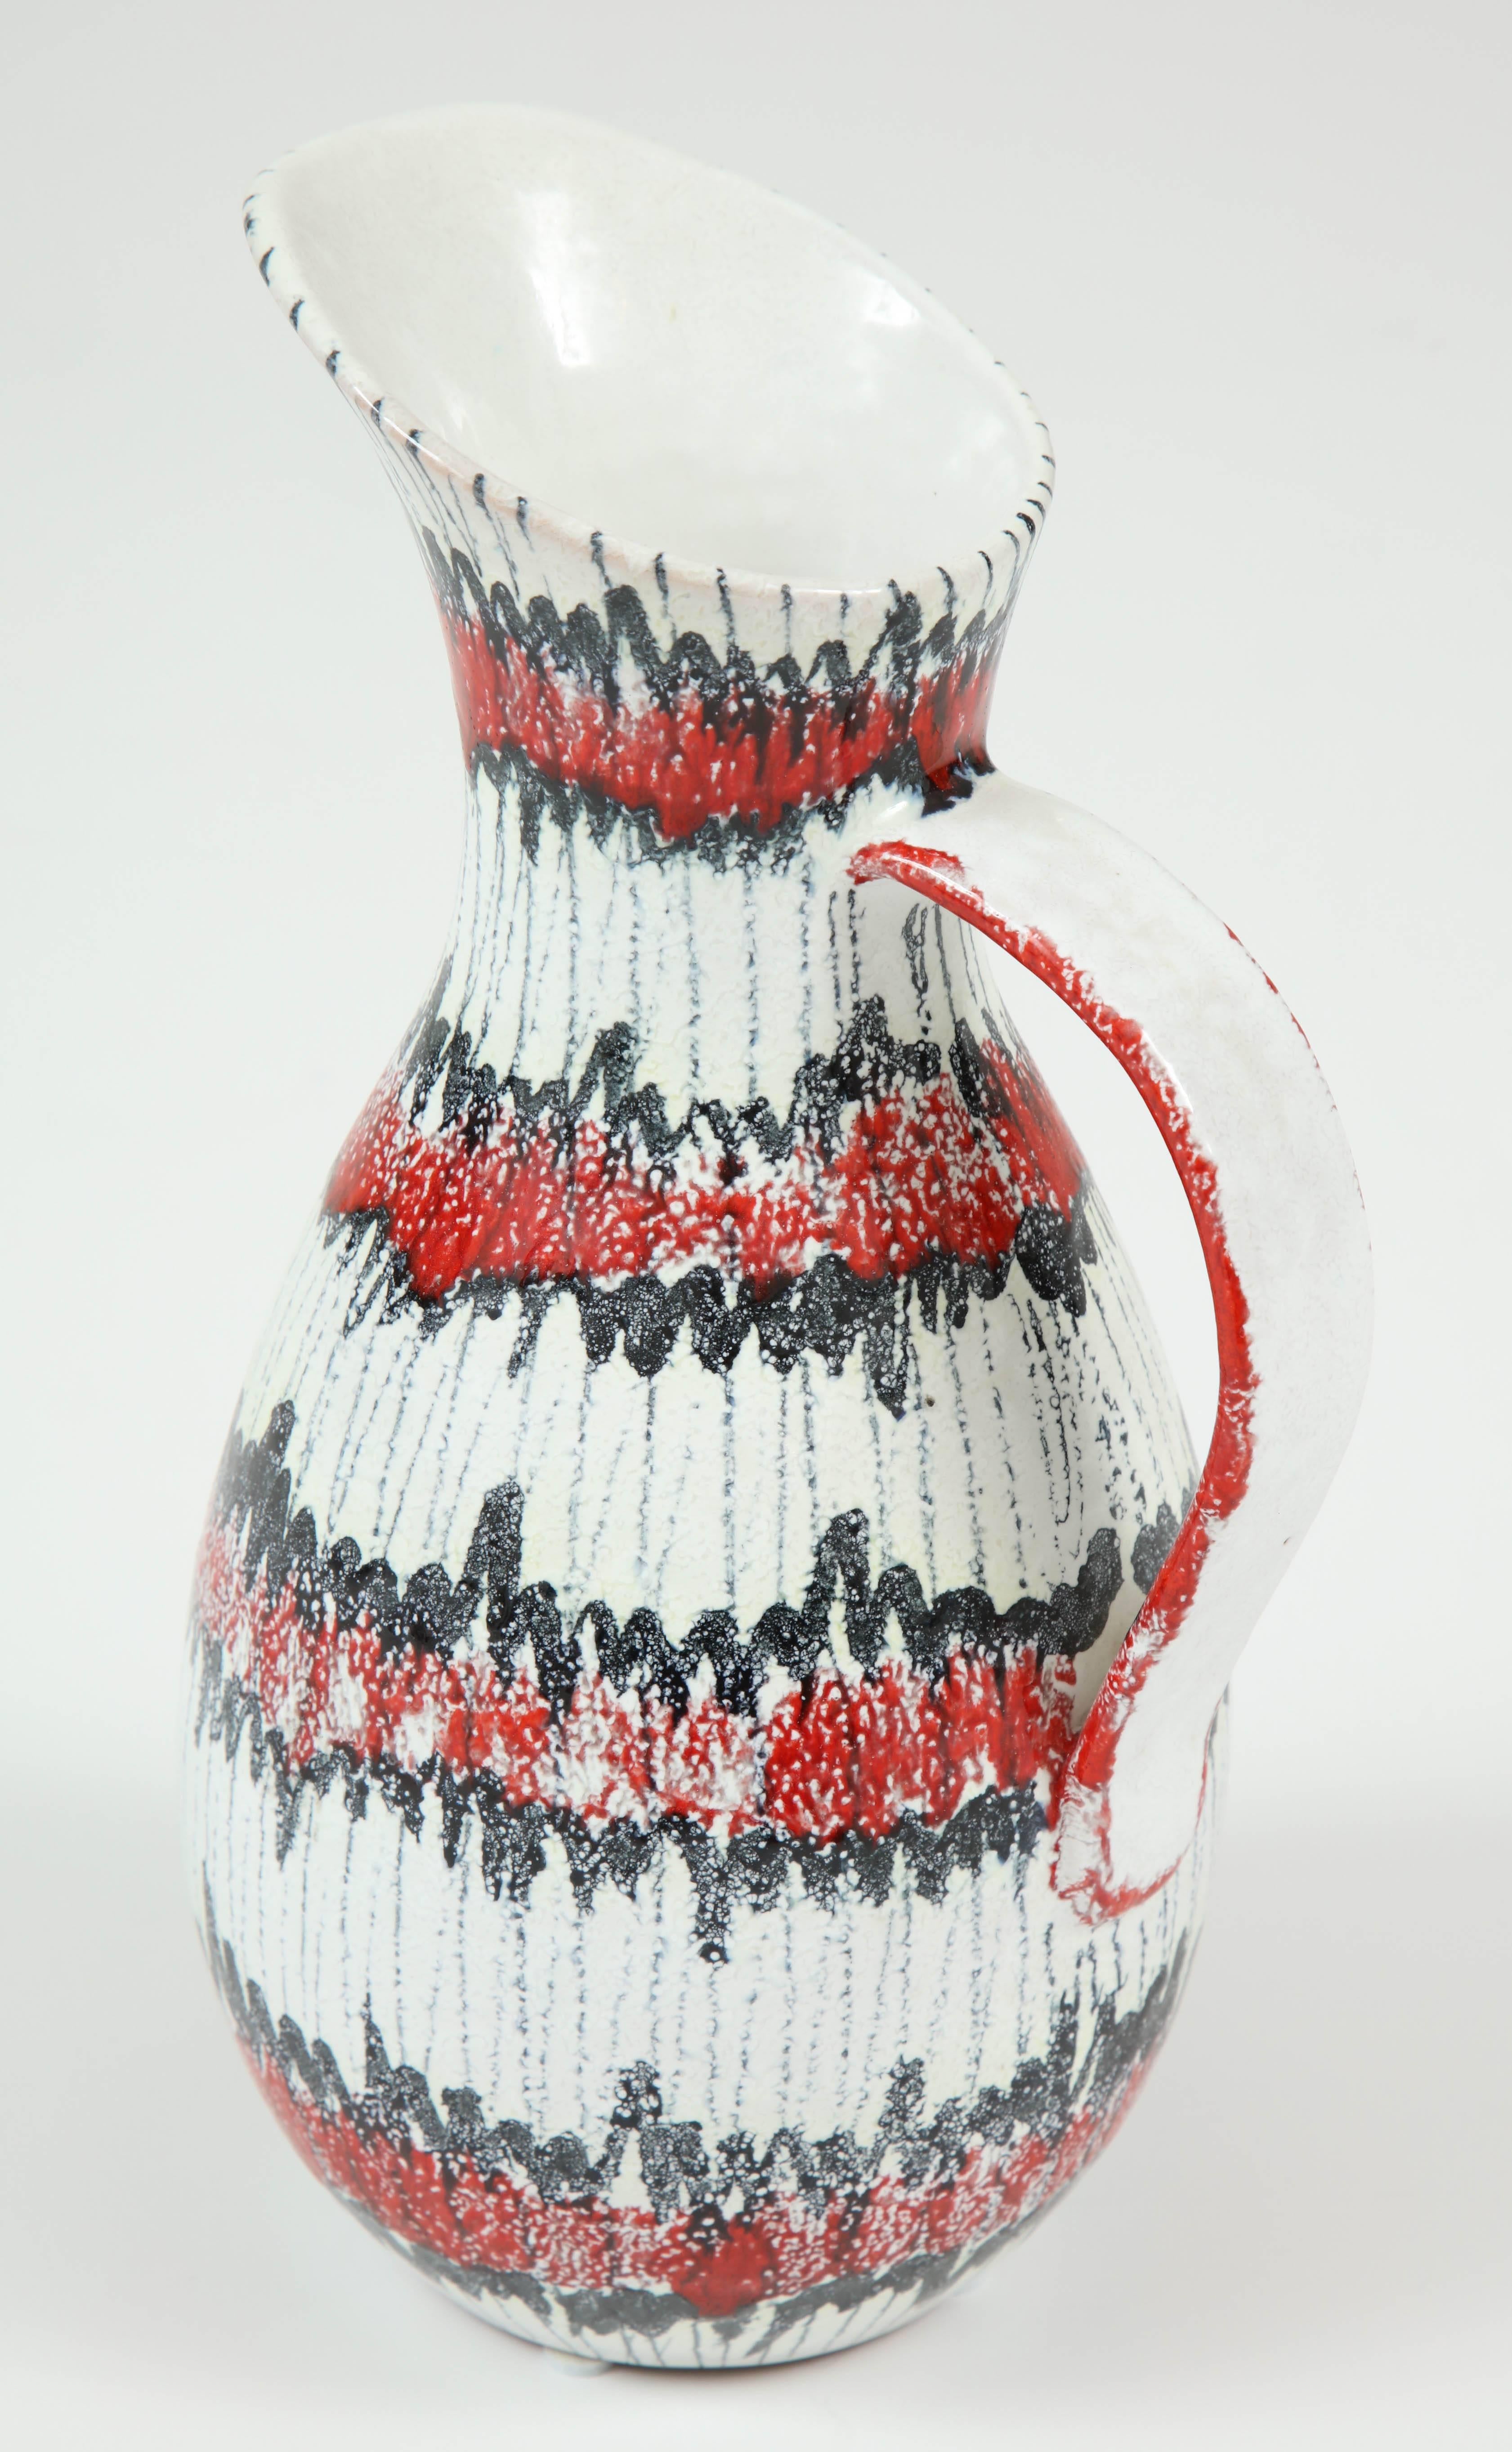 Ceramic Pitcher, Red, White and Black, Italy, Midcentury, C 1950, Ceramic For Sale 1